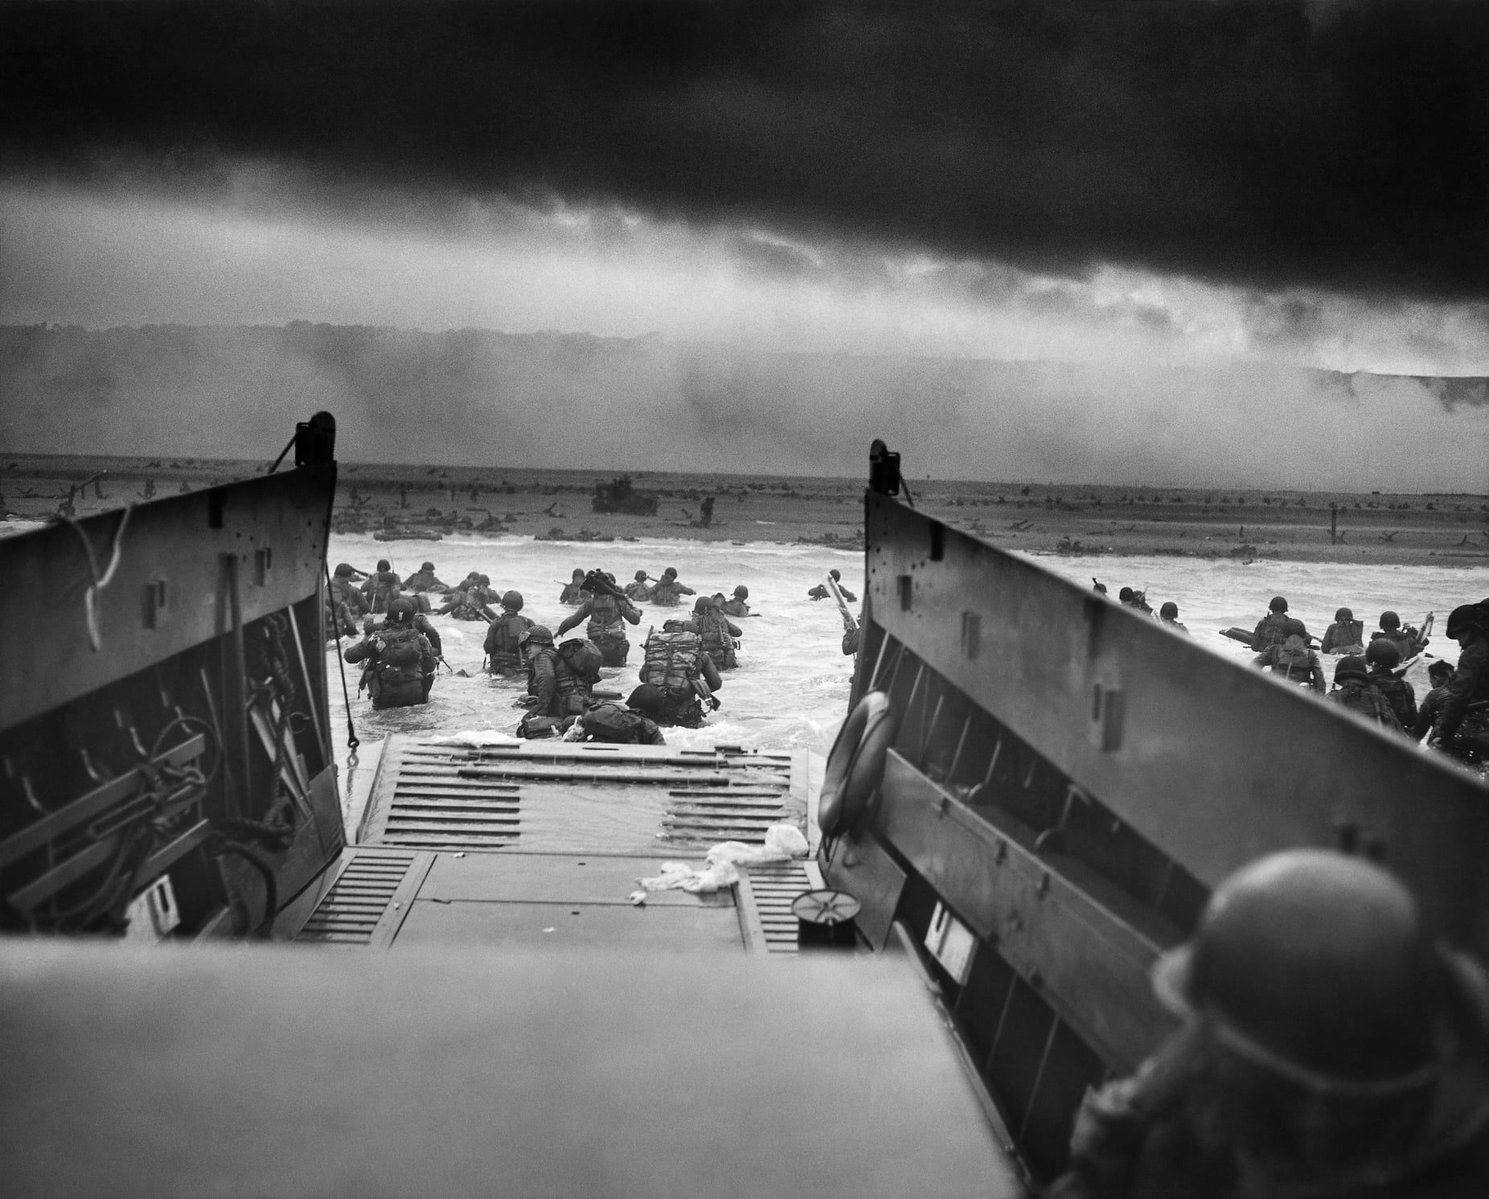 Taxis to Hell and Back – Into the Jaws of Death and was taken at around 7.40 am on 6 June 1944 by Coastguard Chief Photographers Mate Robert F Sargent as the D Day invasion begun.